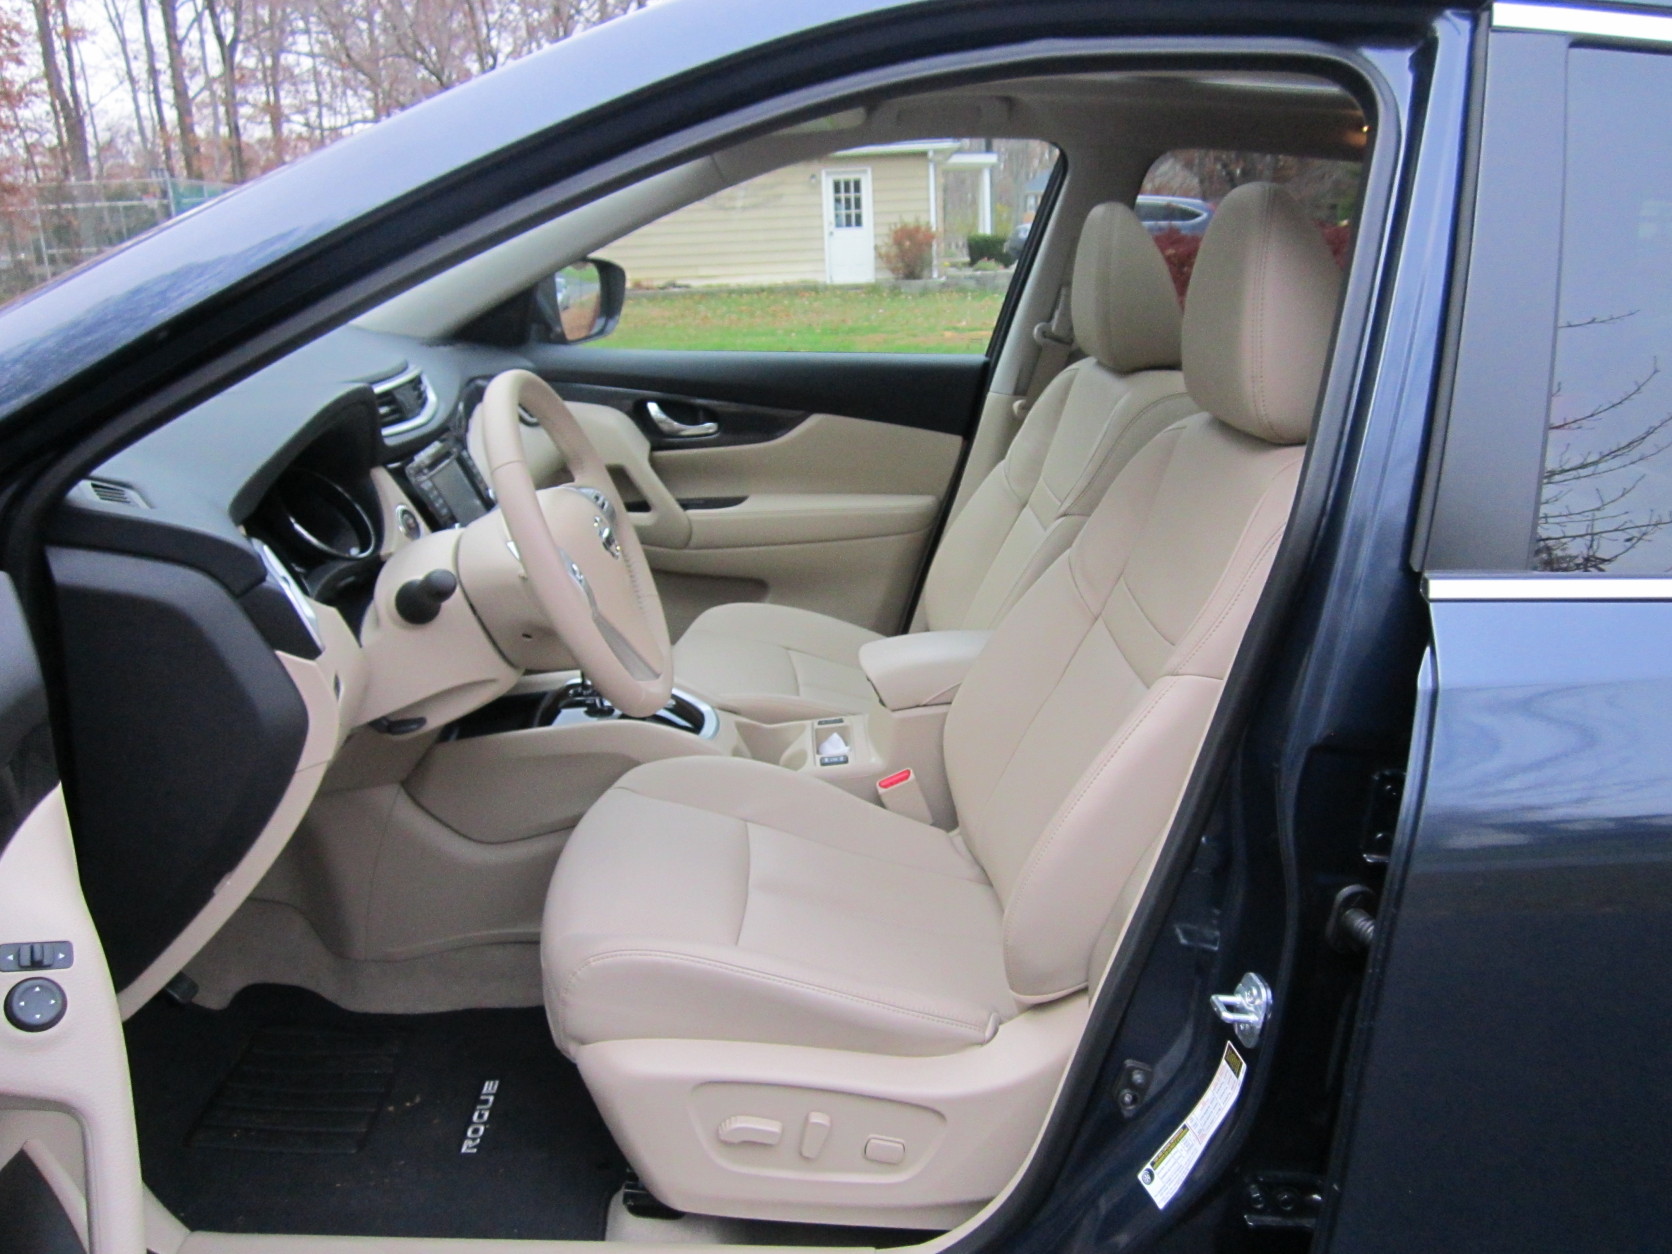 The heated leather front seats are very comfortable and the rear seats not only slide they also recline. (WTOP/Mike Parris)